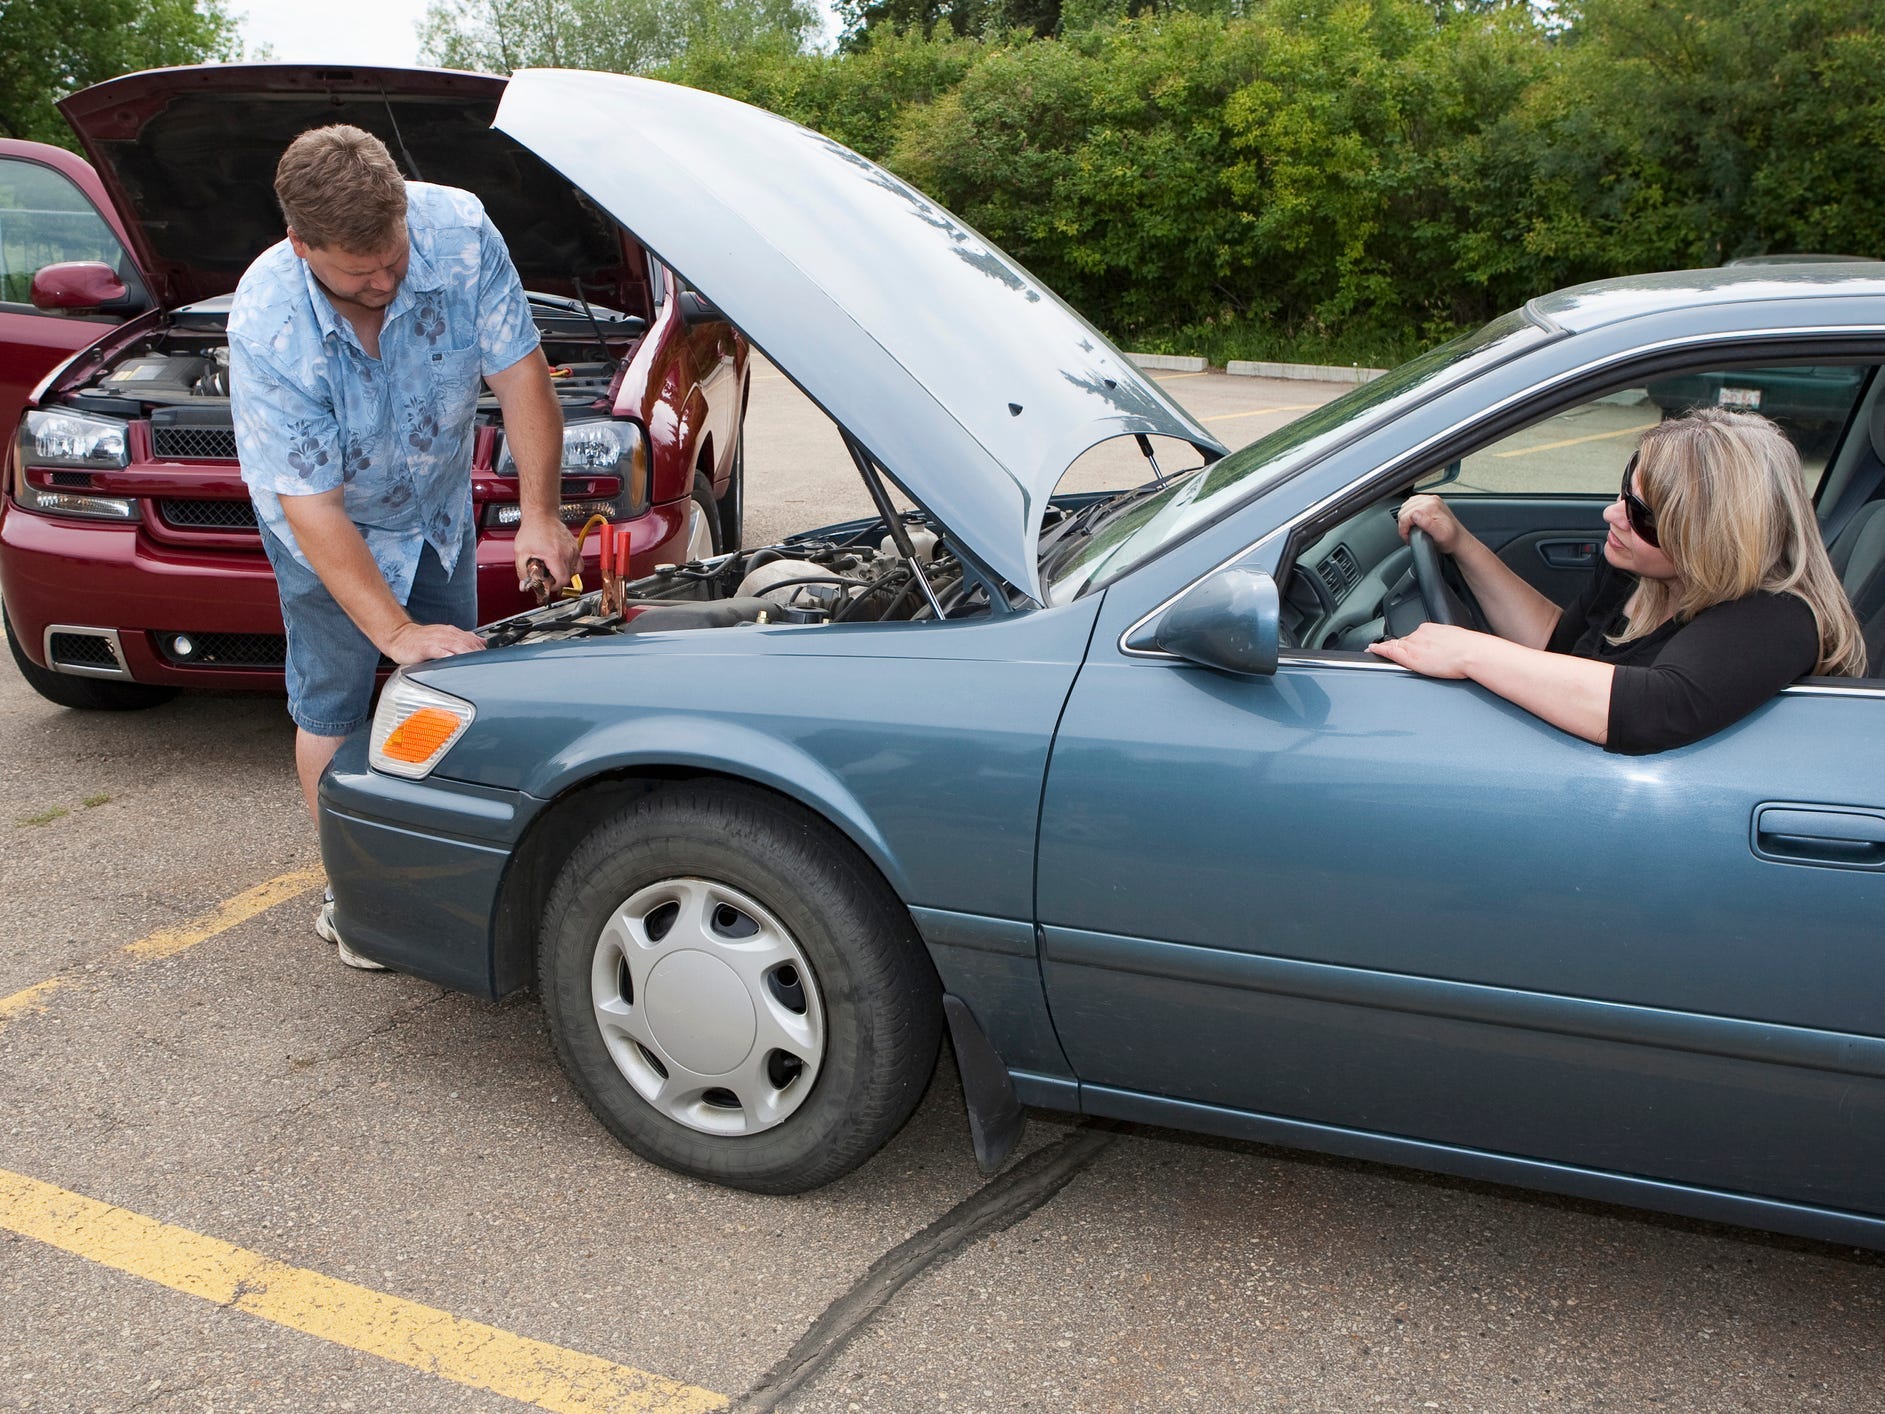 A person hooks up jumper cables to the battery of a blue car while the driver looks on